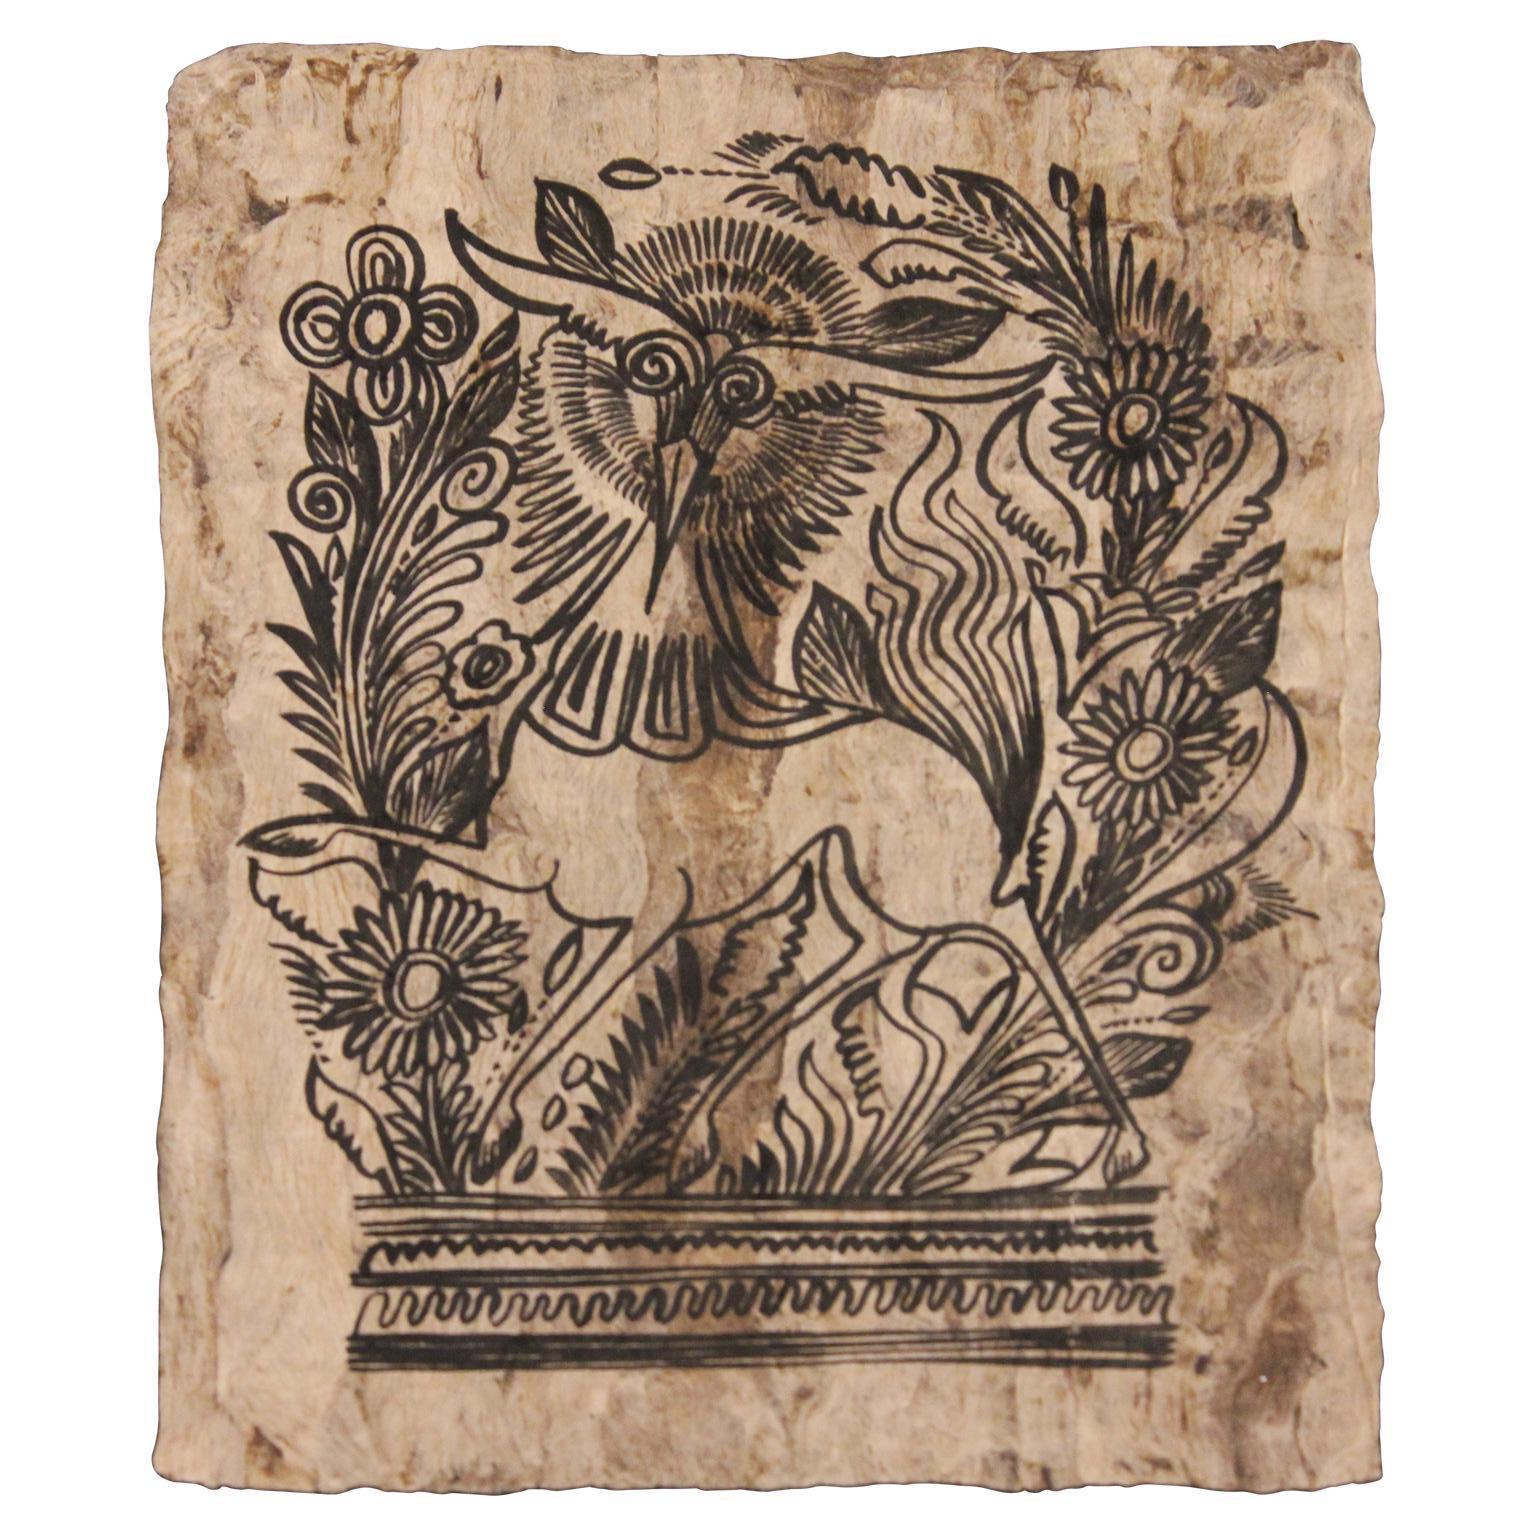 Mythical Creature with Foliage Painted on Handmade Paper